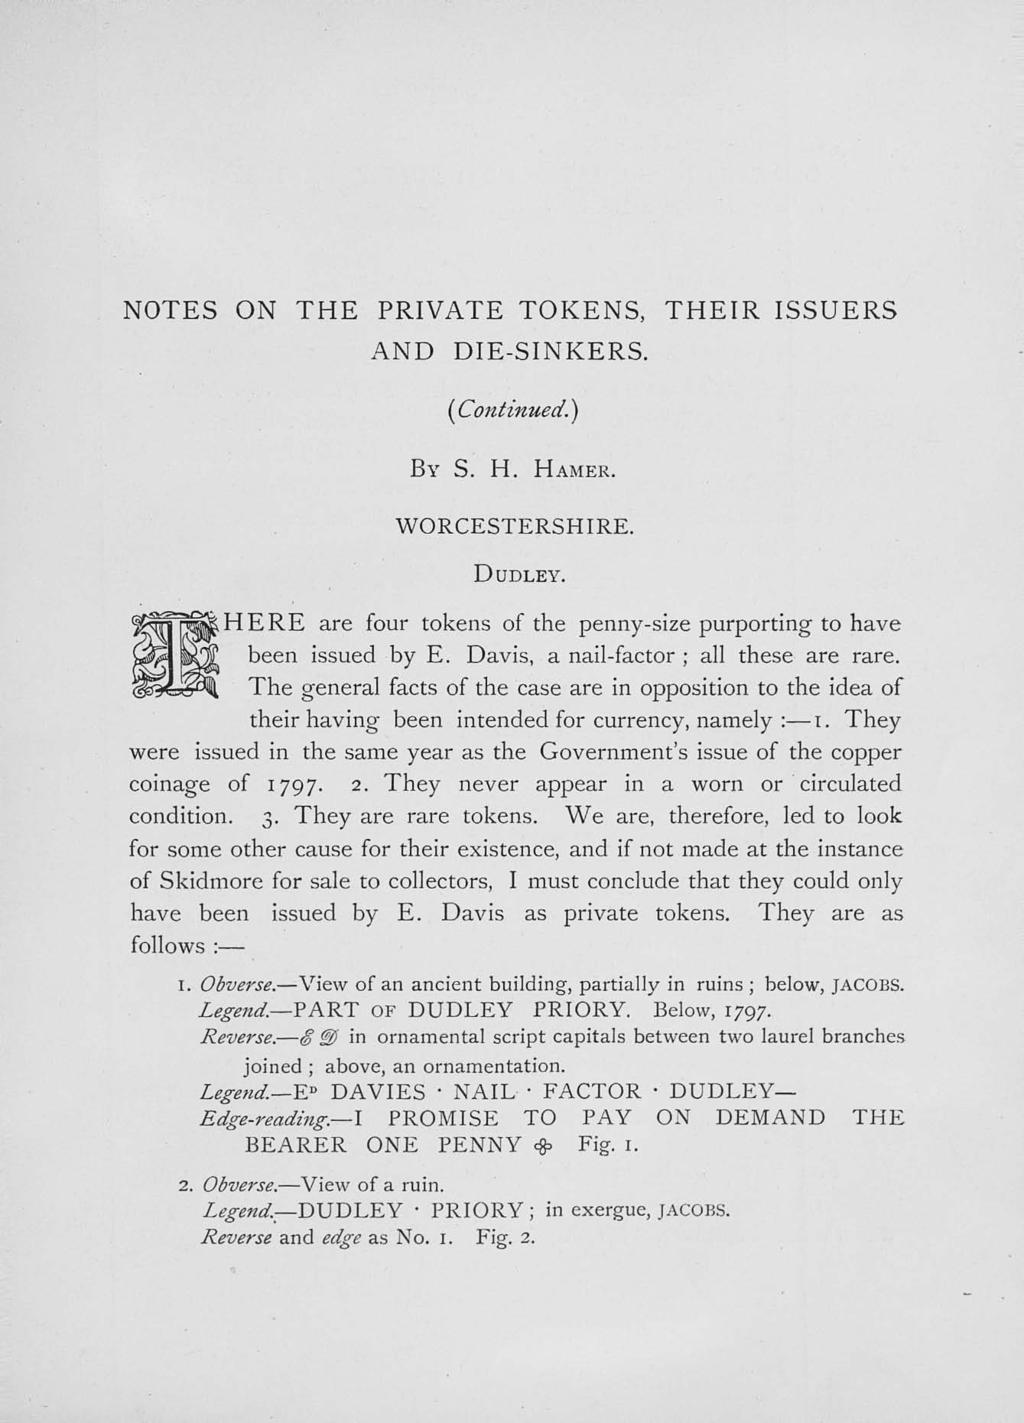 NOTES ON T H E PRIVATE TOKENS, THEIR ISSUERS A N D DIE-SINKERS. (Continued.) BY S. H. HAMER. WORCESTERSHIRE. DUDLEY. HERE are four tokens of the penny-size purporting to have been issued by E.